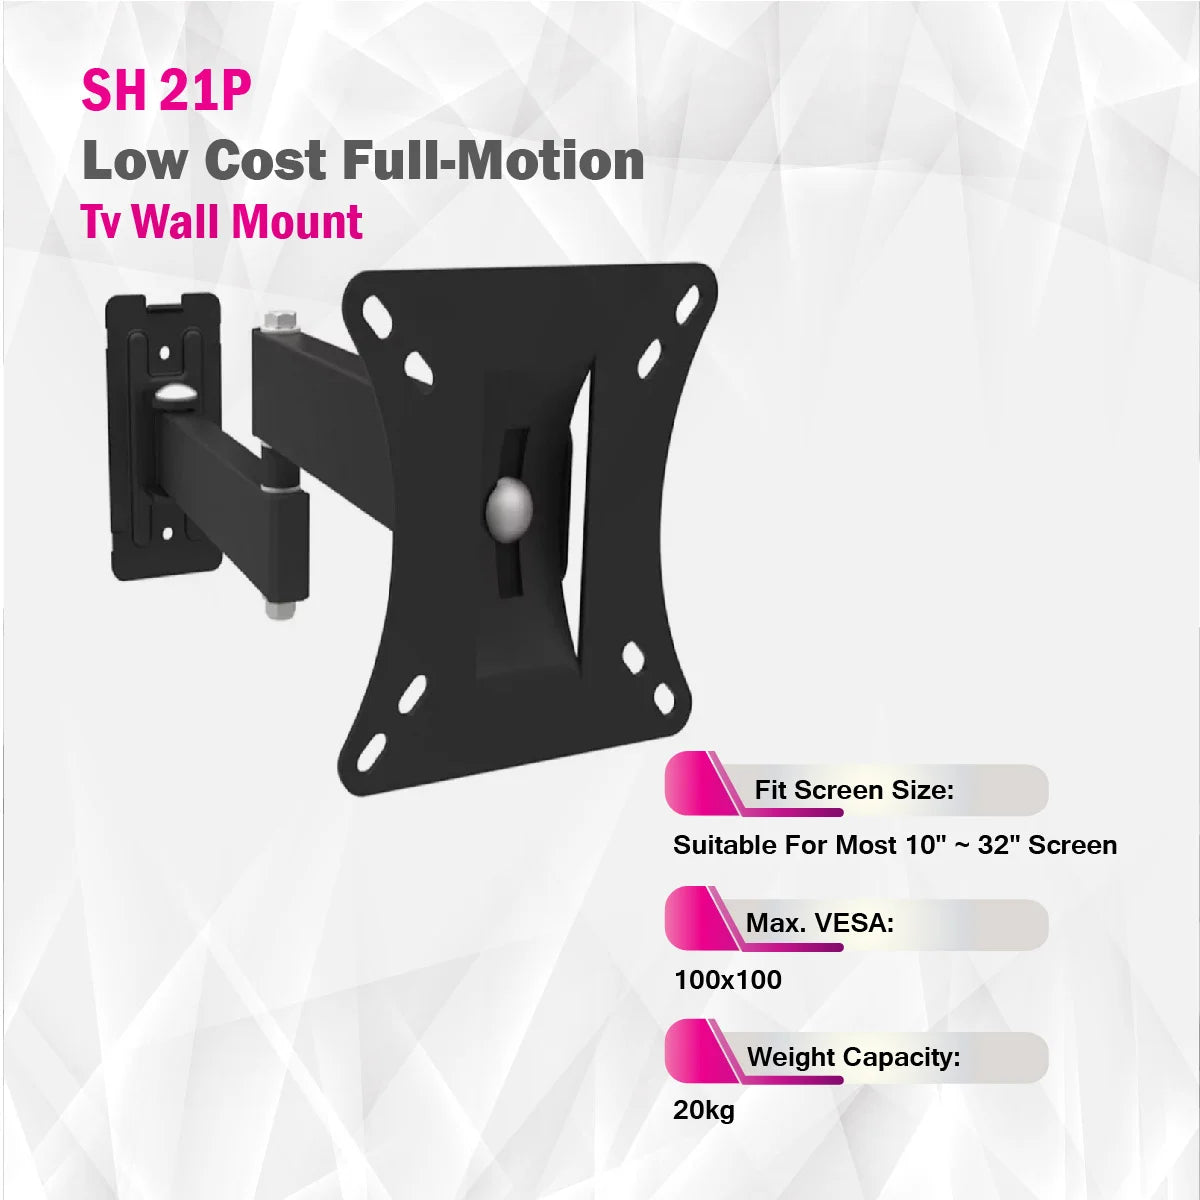 Skill Tech SH 21P - Low Cost Full-Motion Tv Wall Mount